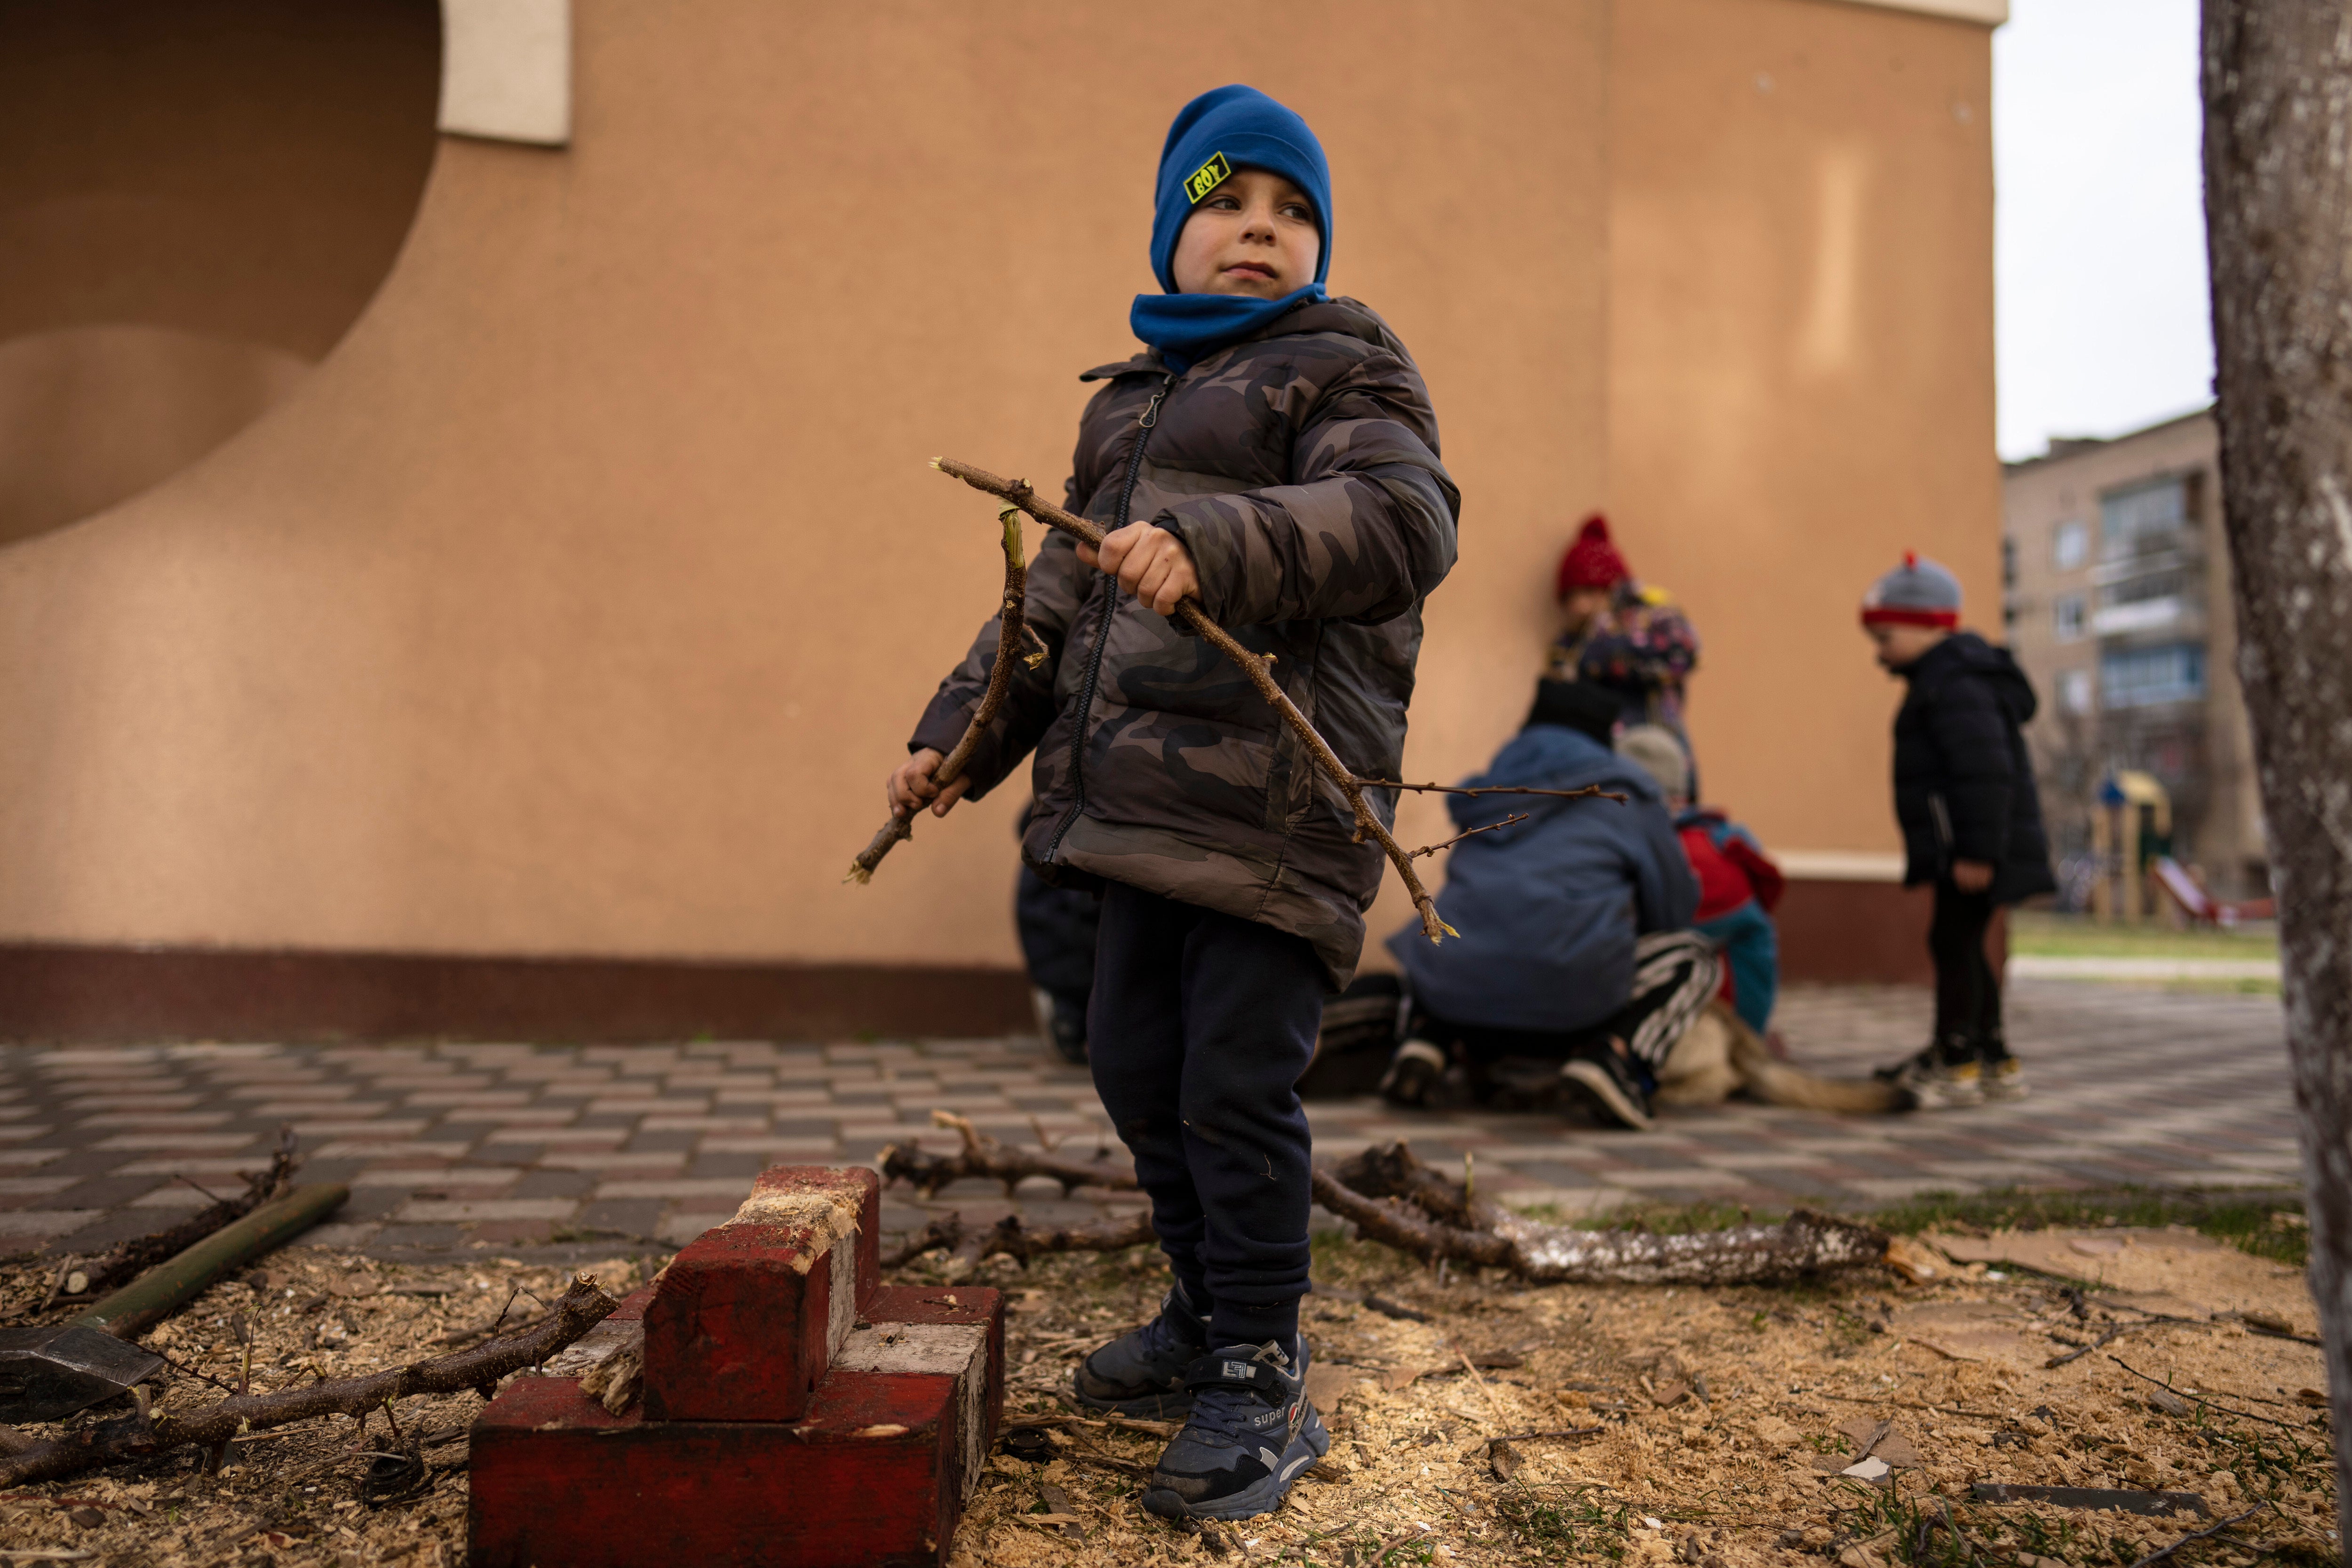 6-year-old Vlad's mother died last month when the family was forced to shelter in a basement during the occupation by the Russian army. The family still doesn't know what illness caused her death